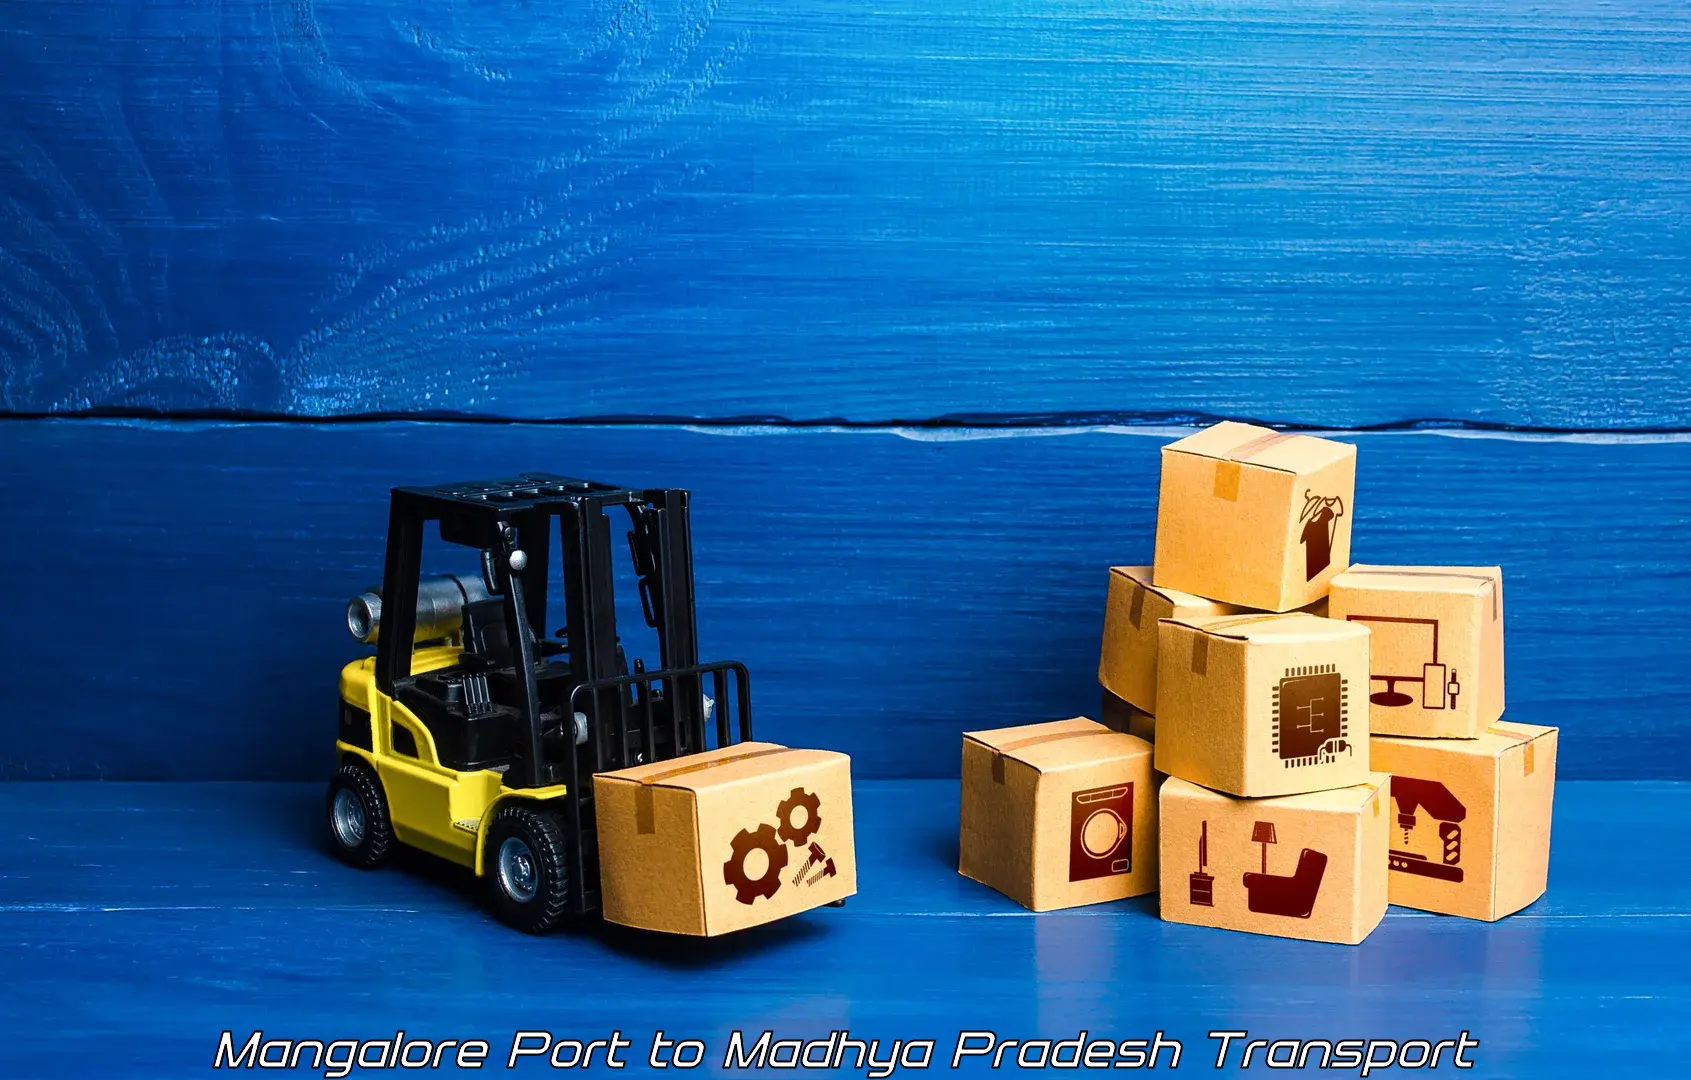 Lorry transport service Mangalore Port to Shahdol